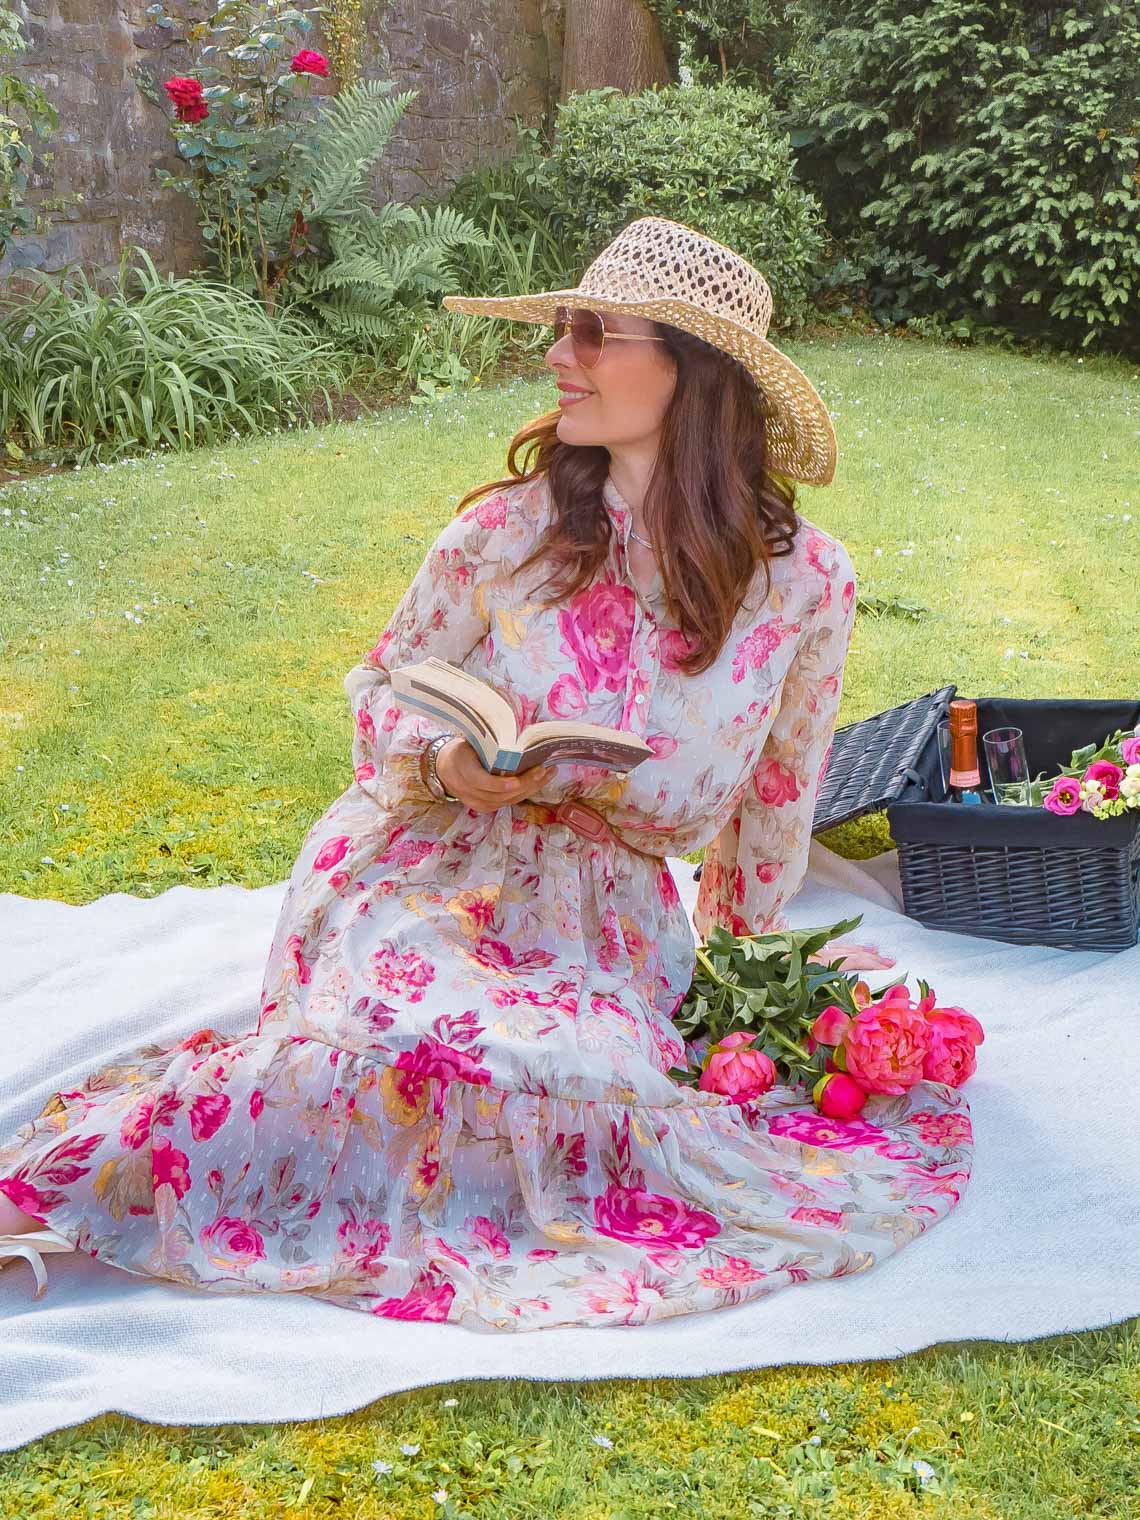 H&M floral dress, picnic in the garden